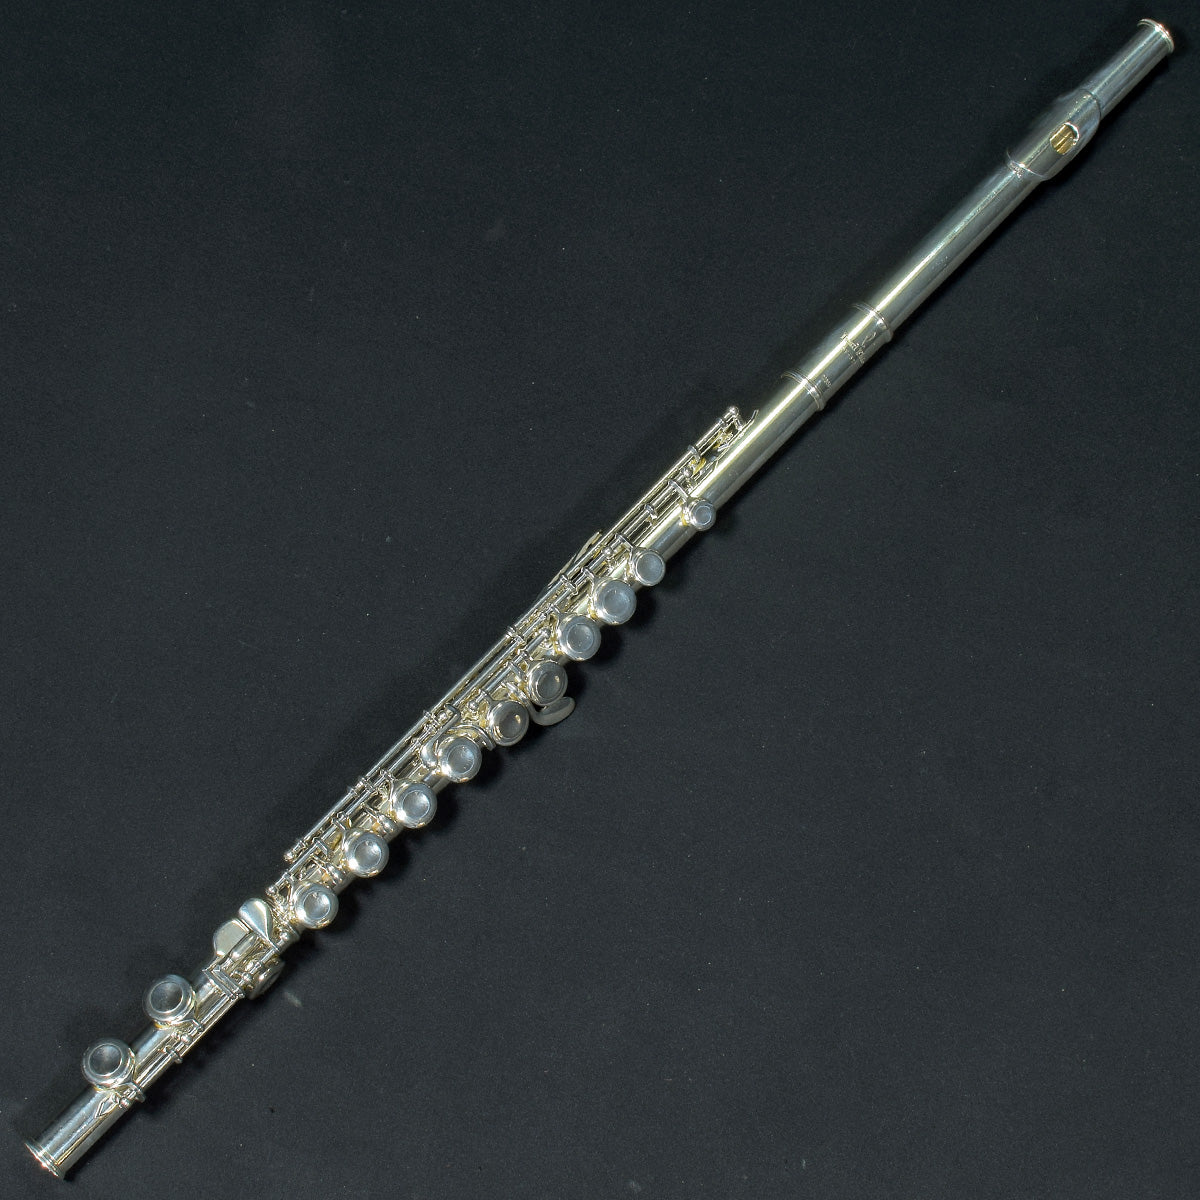 [SN 20804] USED PEARL / Pearl / PF-521E Silver flute with silver singing mouth E-meca [20]